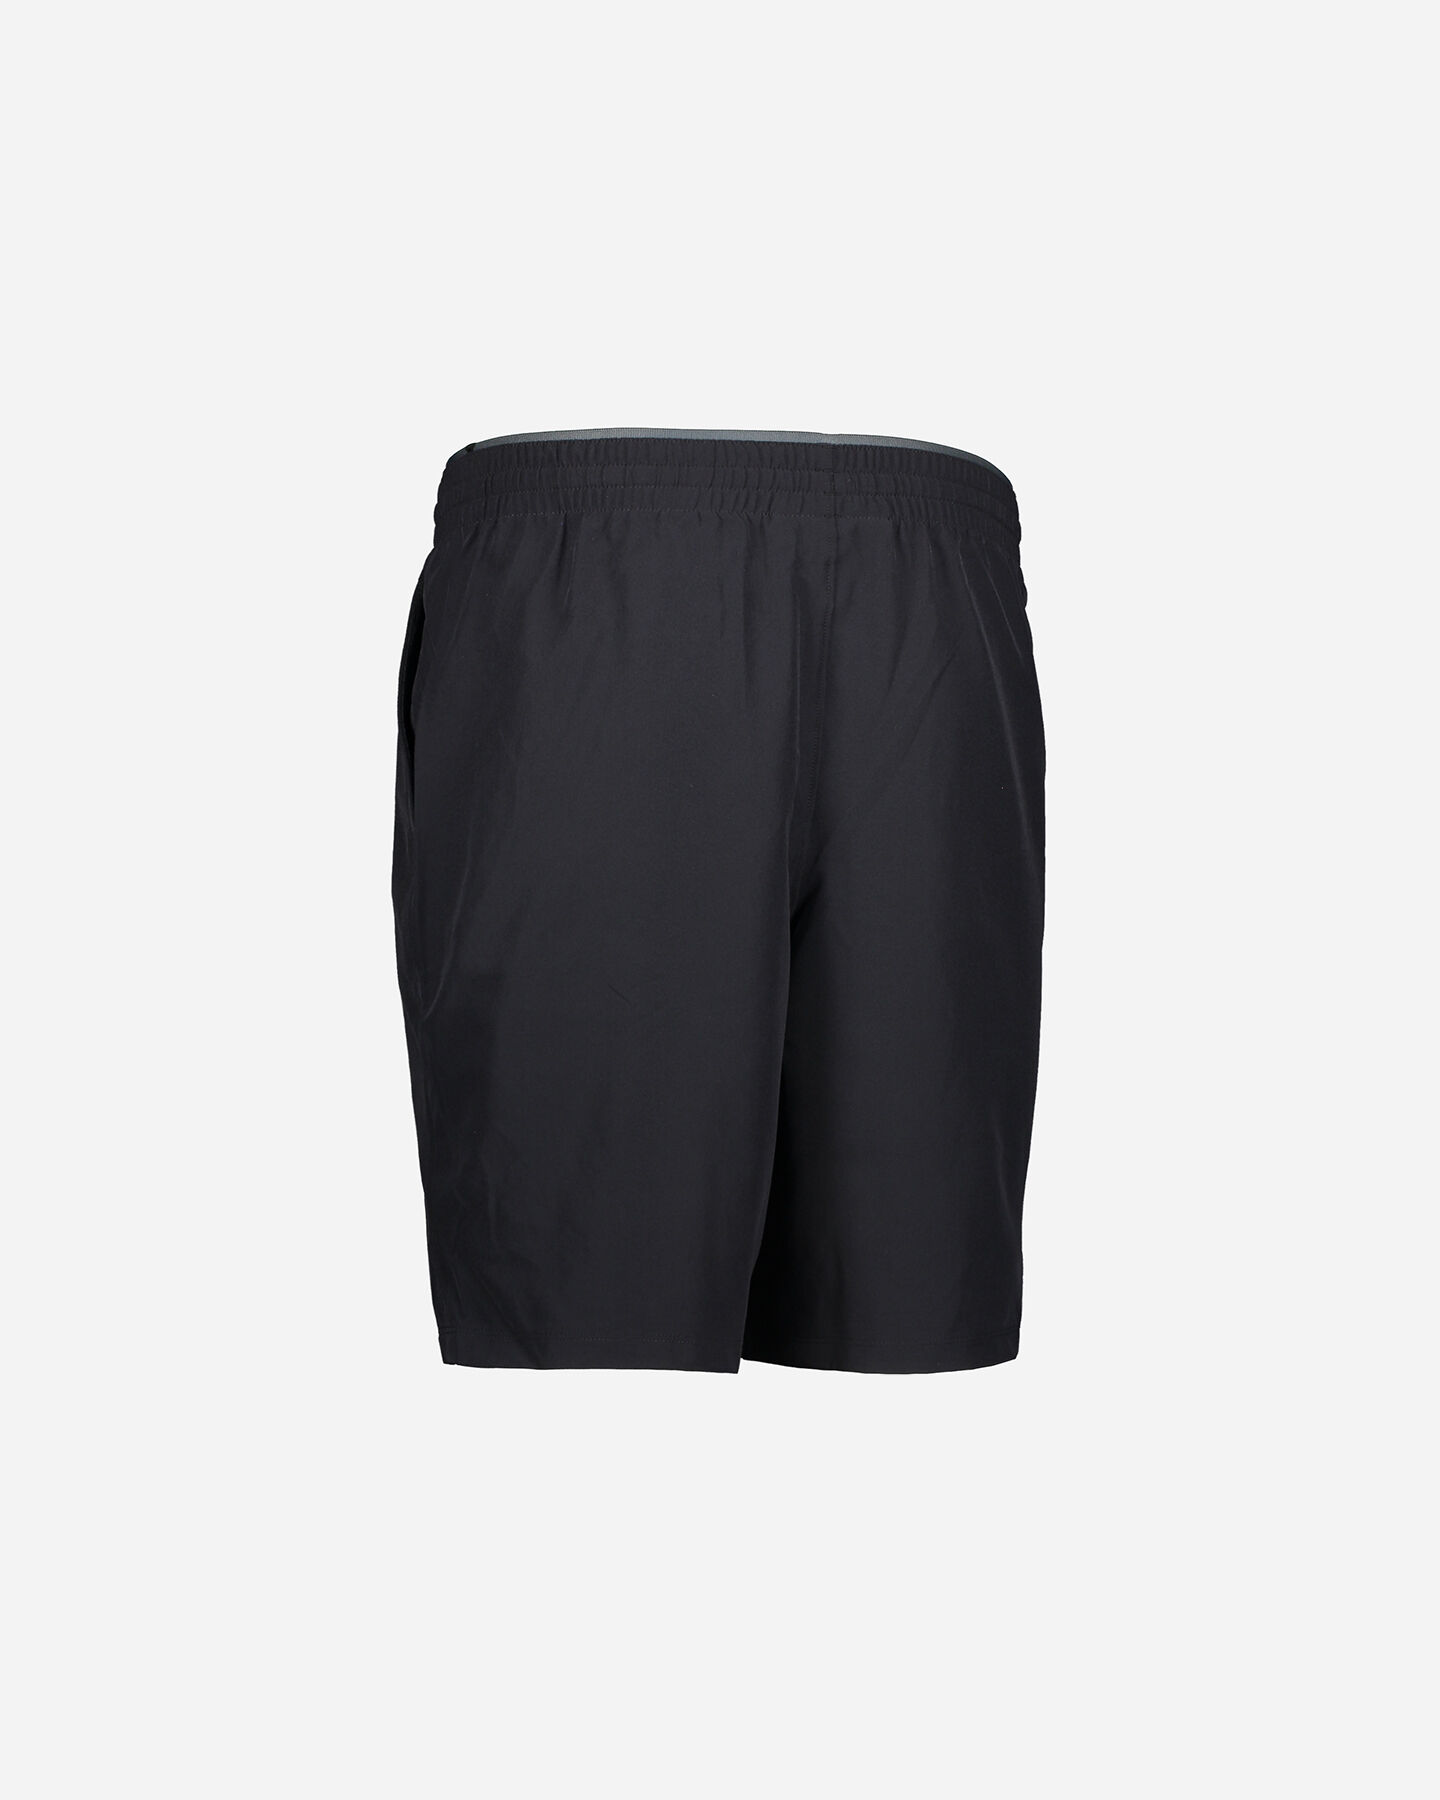  Pantalone training UNDER ARMOUR QUALIFIER WG M S5034893|0002|SM scatto 2